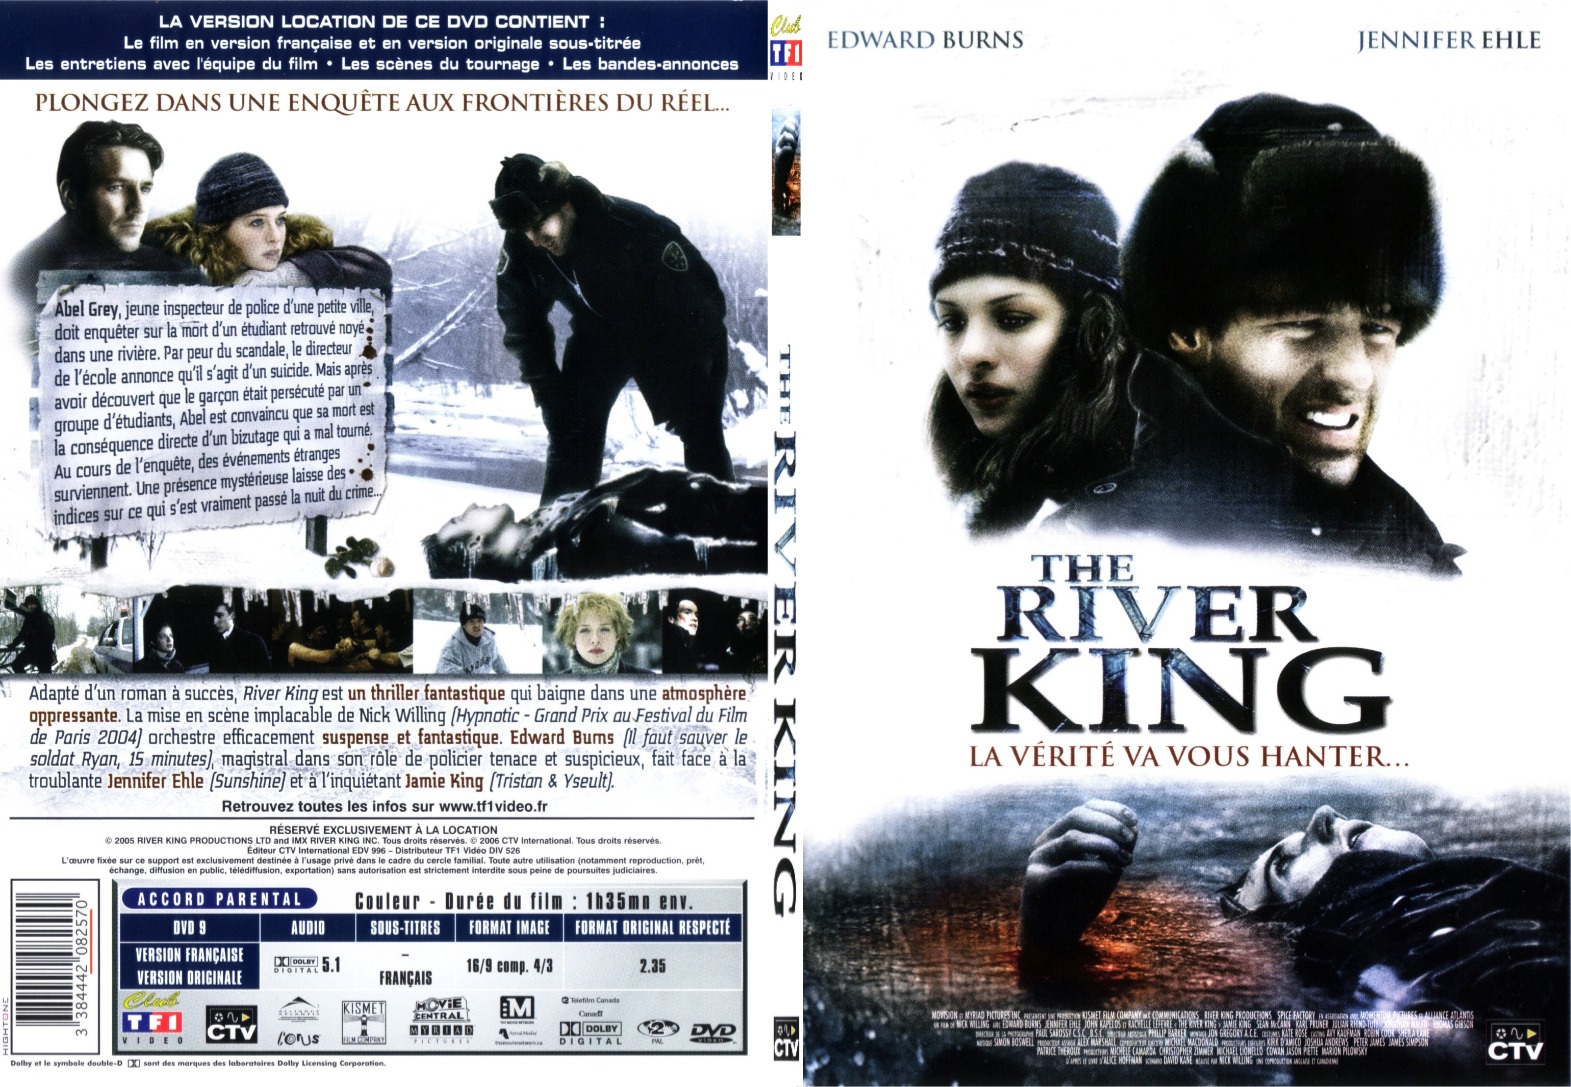 Jaquette DVD The river king - SLIM